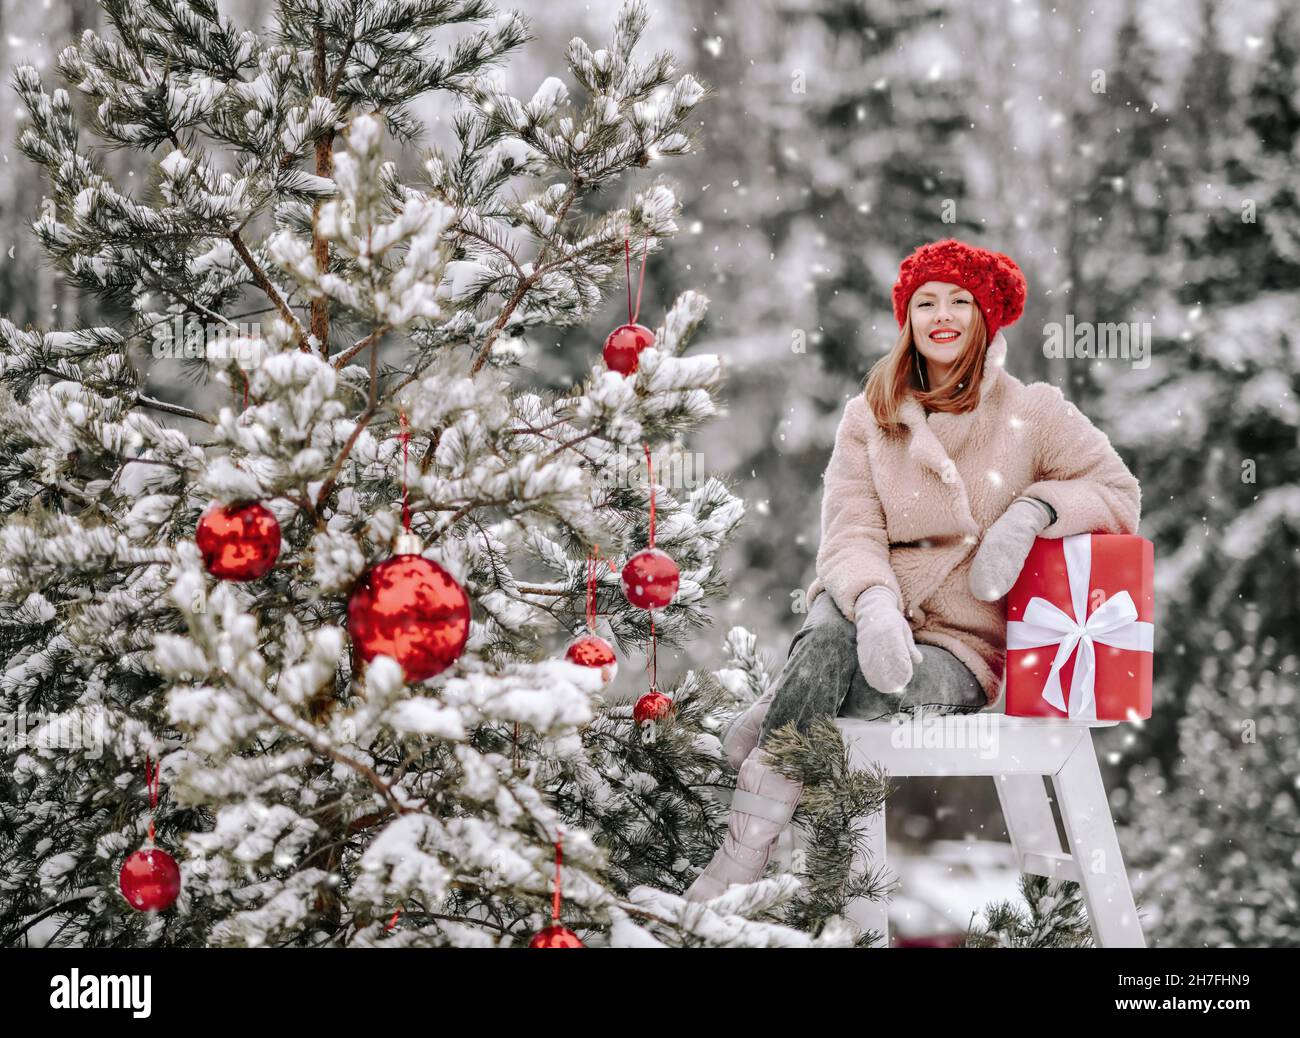 Young smiling pretty woman in stylish warm clothing sitting with holiday gift on stool near decorated Christmas outdoors Stock Photo